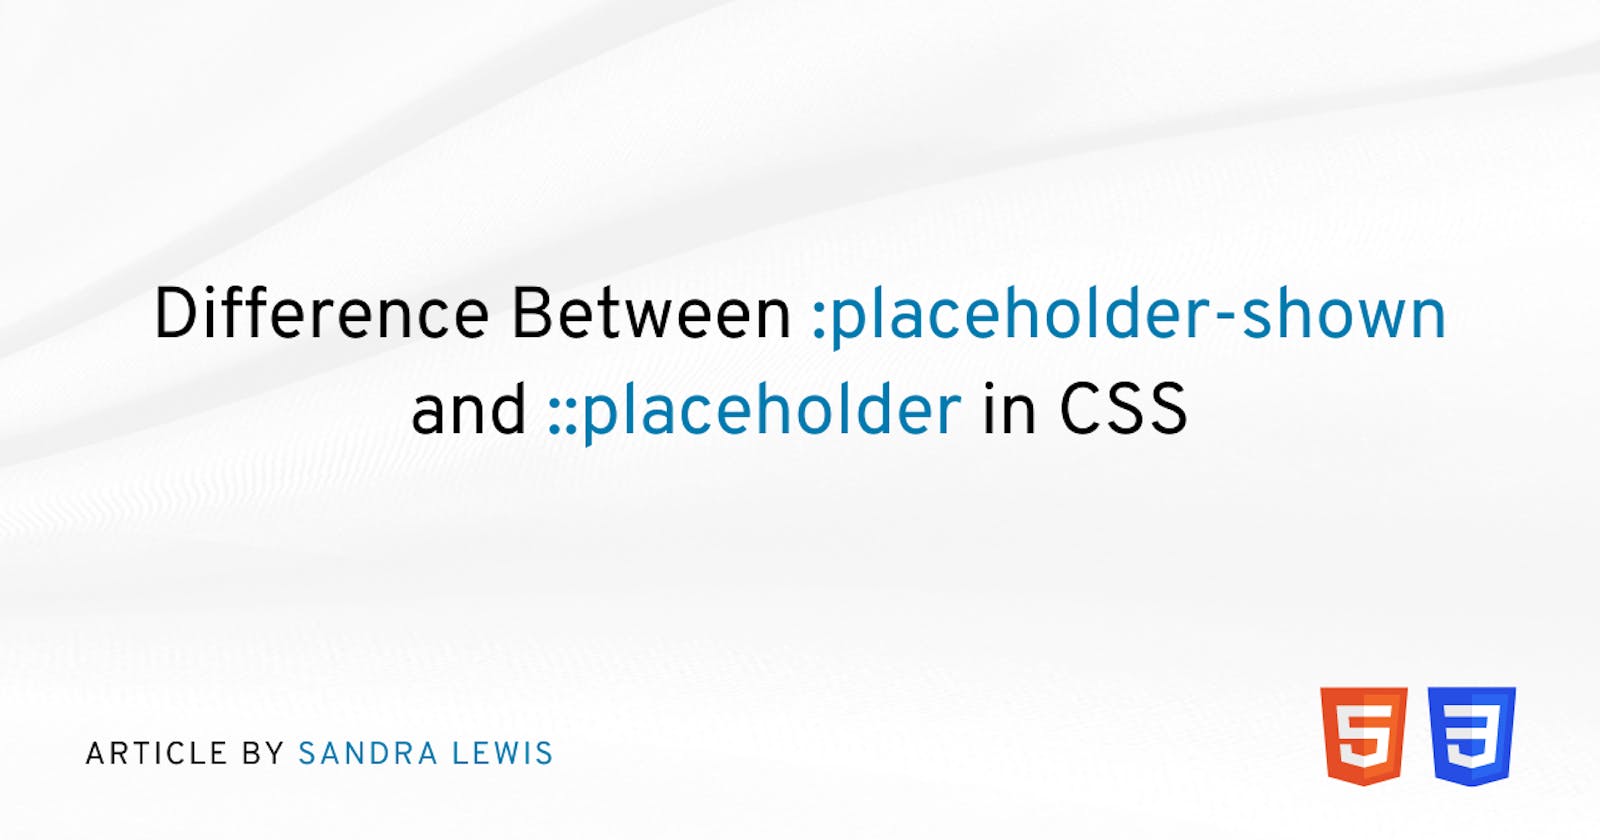 Difference Between :placeholder-shown and ::placeholder in CSS